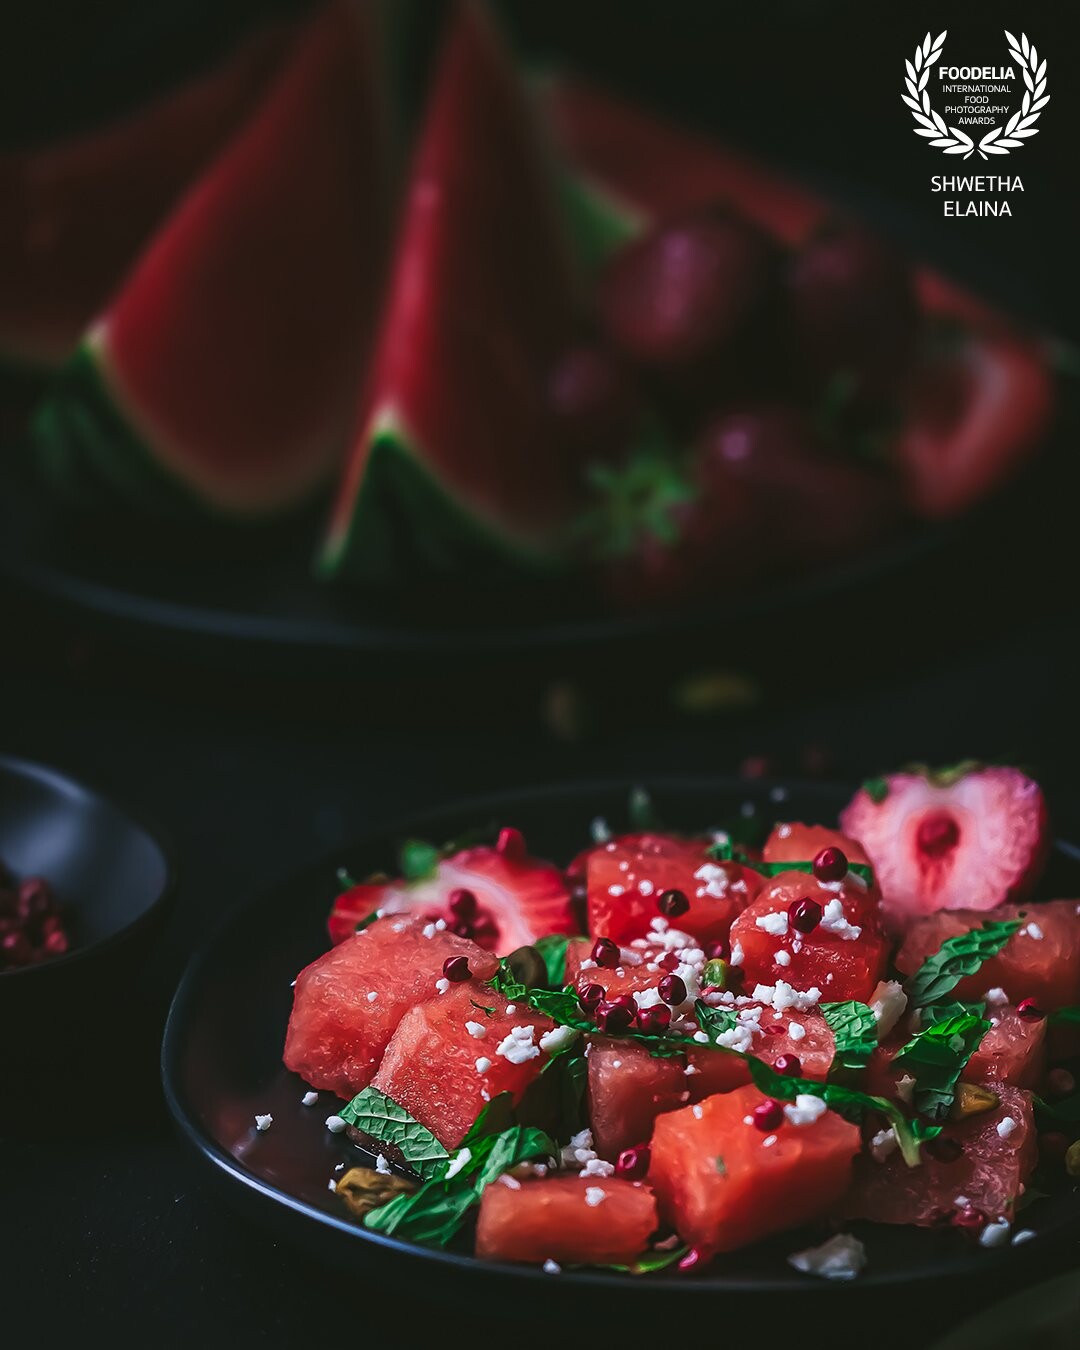 A humble salad with no added salt, no oil, no salad dressing, just fresh berries, water melon and some torn mint.  A few peppercorns for heat and some crumbled feta for saltiness.  Simple, refreshing and ready in a few, on a hot summer's day.